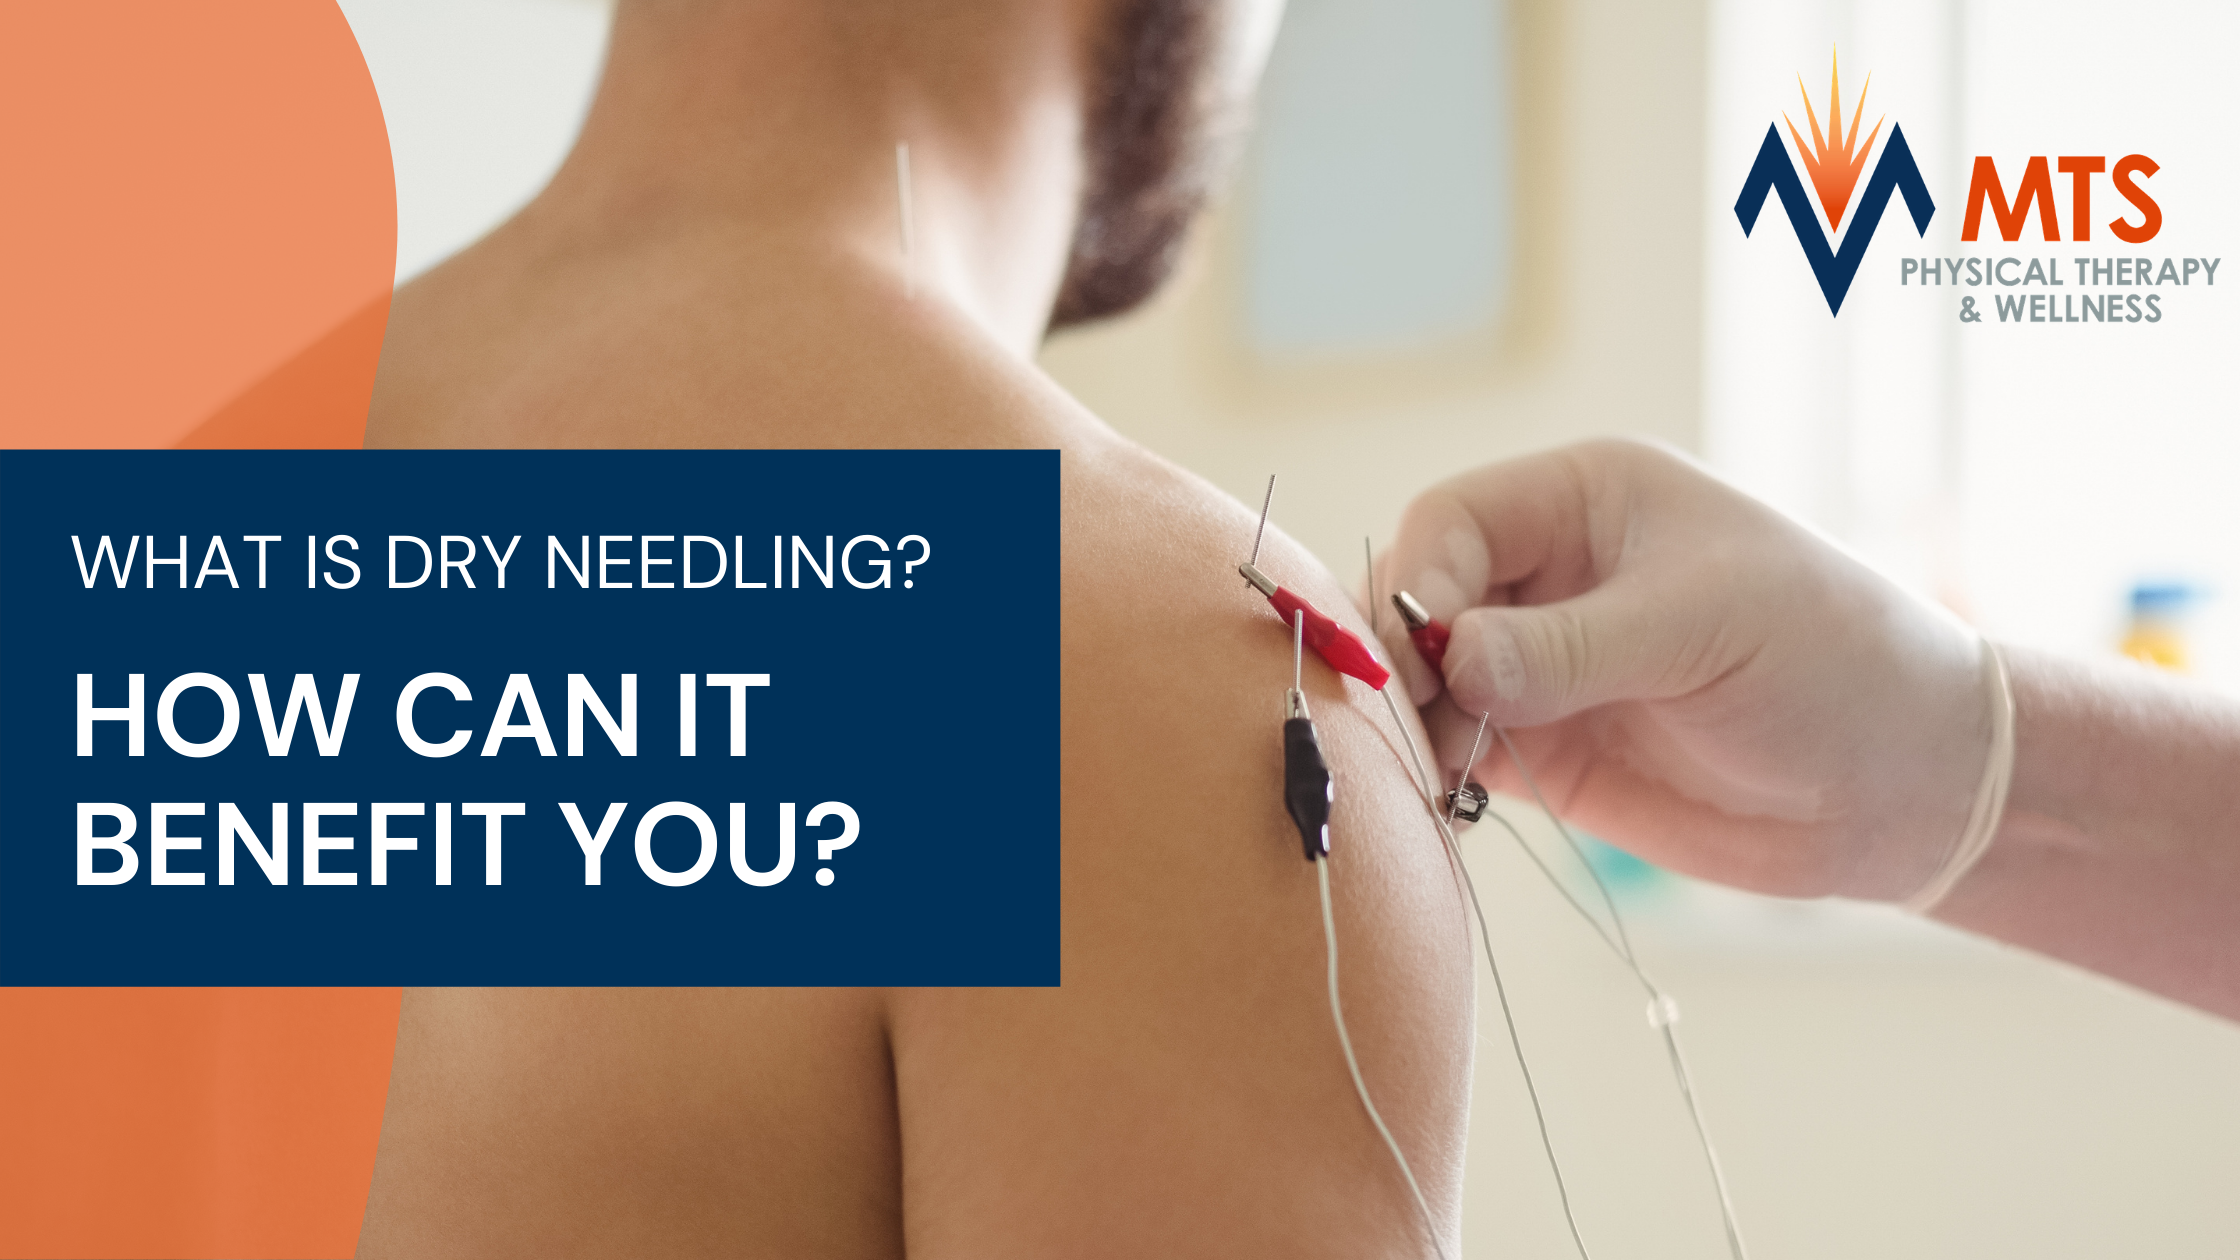 https://www.mtsphysicaltherapy.com/hs-fs/hubfs/What%20is%20Dry%20Needling%20%26%20How%20Can%20It%20Benefit%20You_.png?width=2240&name=What%20is%20Dry%20Needling%20%26%20How%20Can%20It%20Benefit%20You_.png